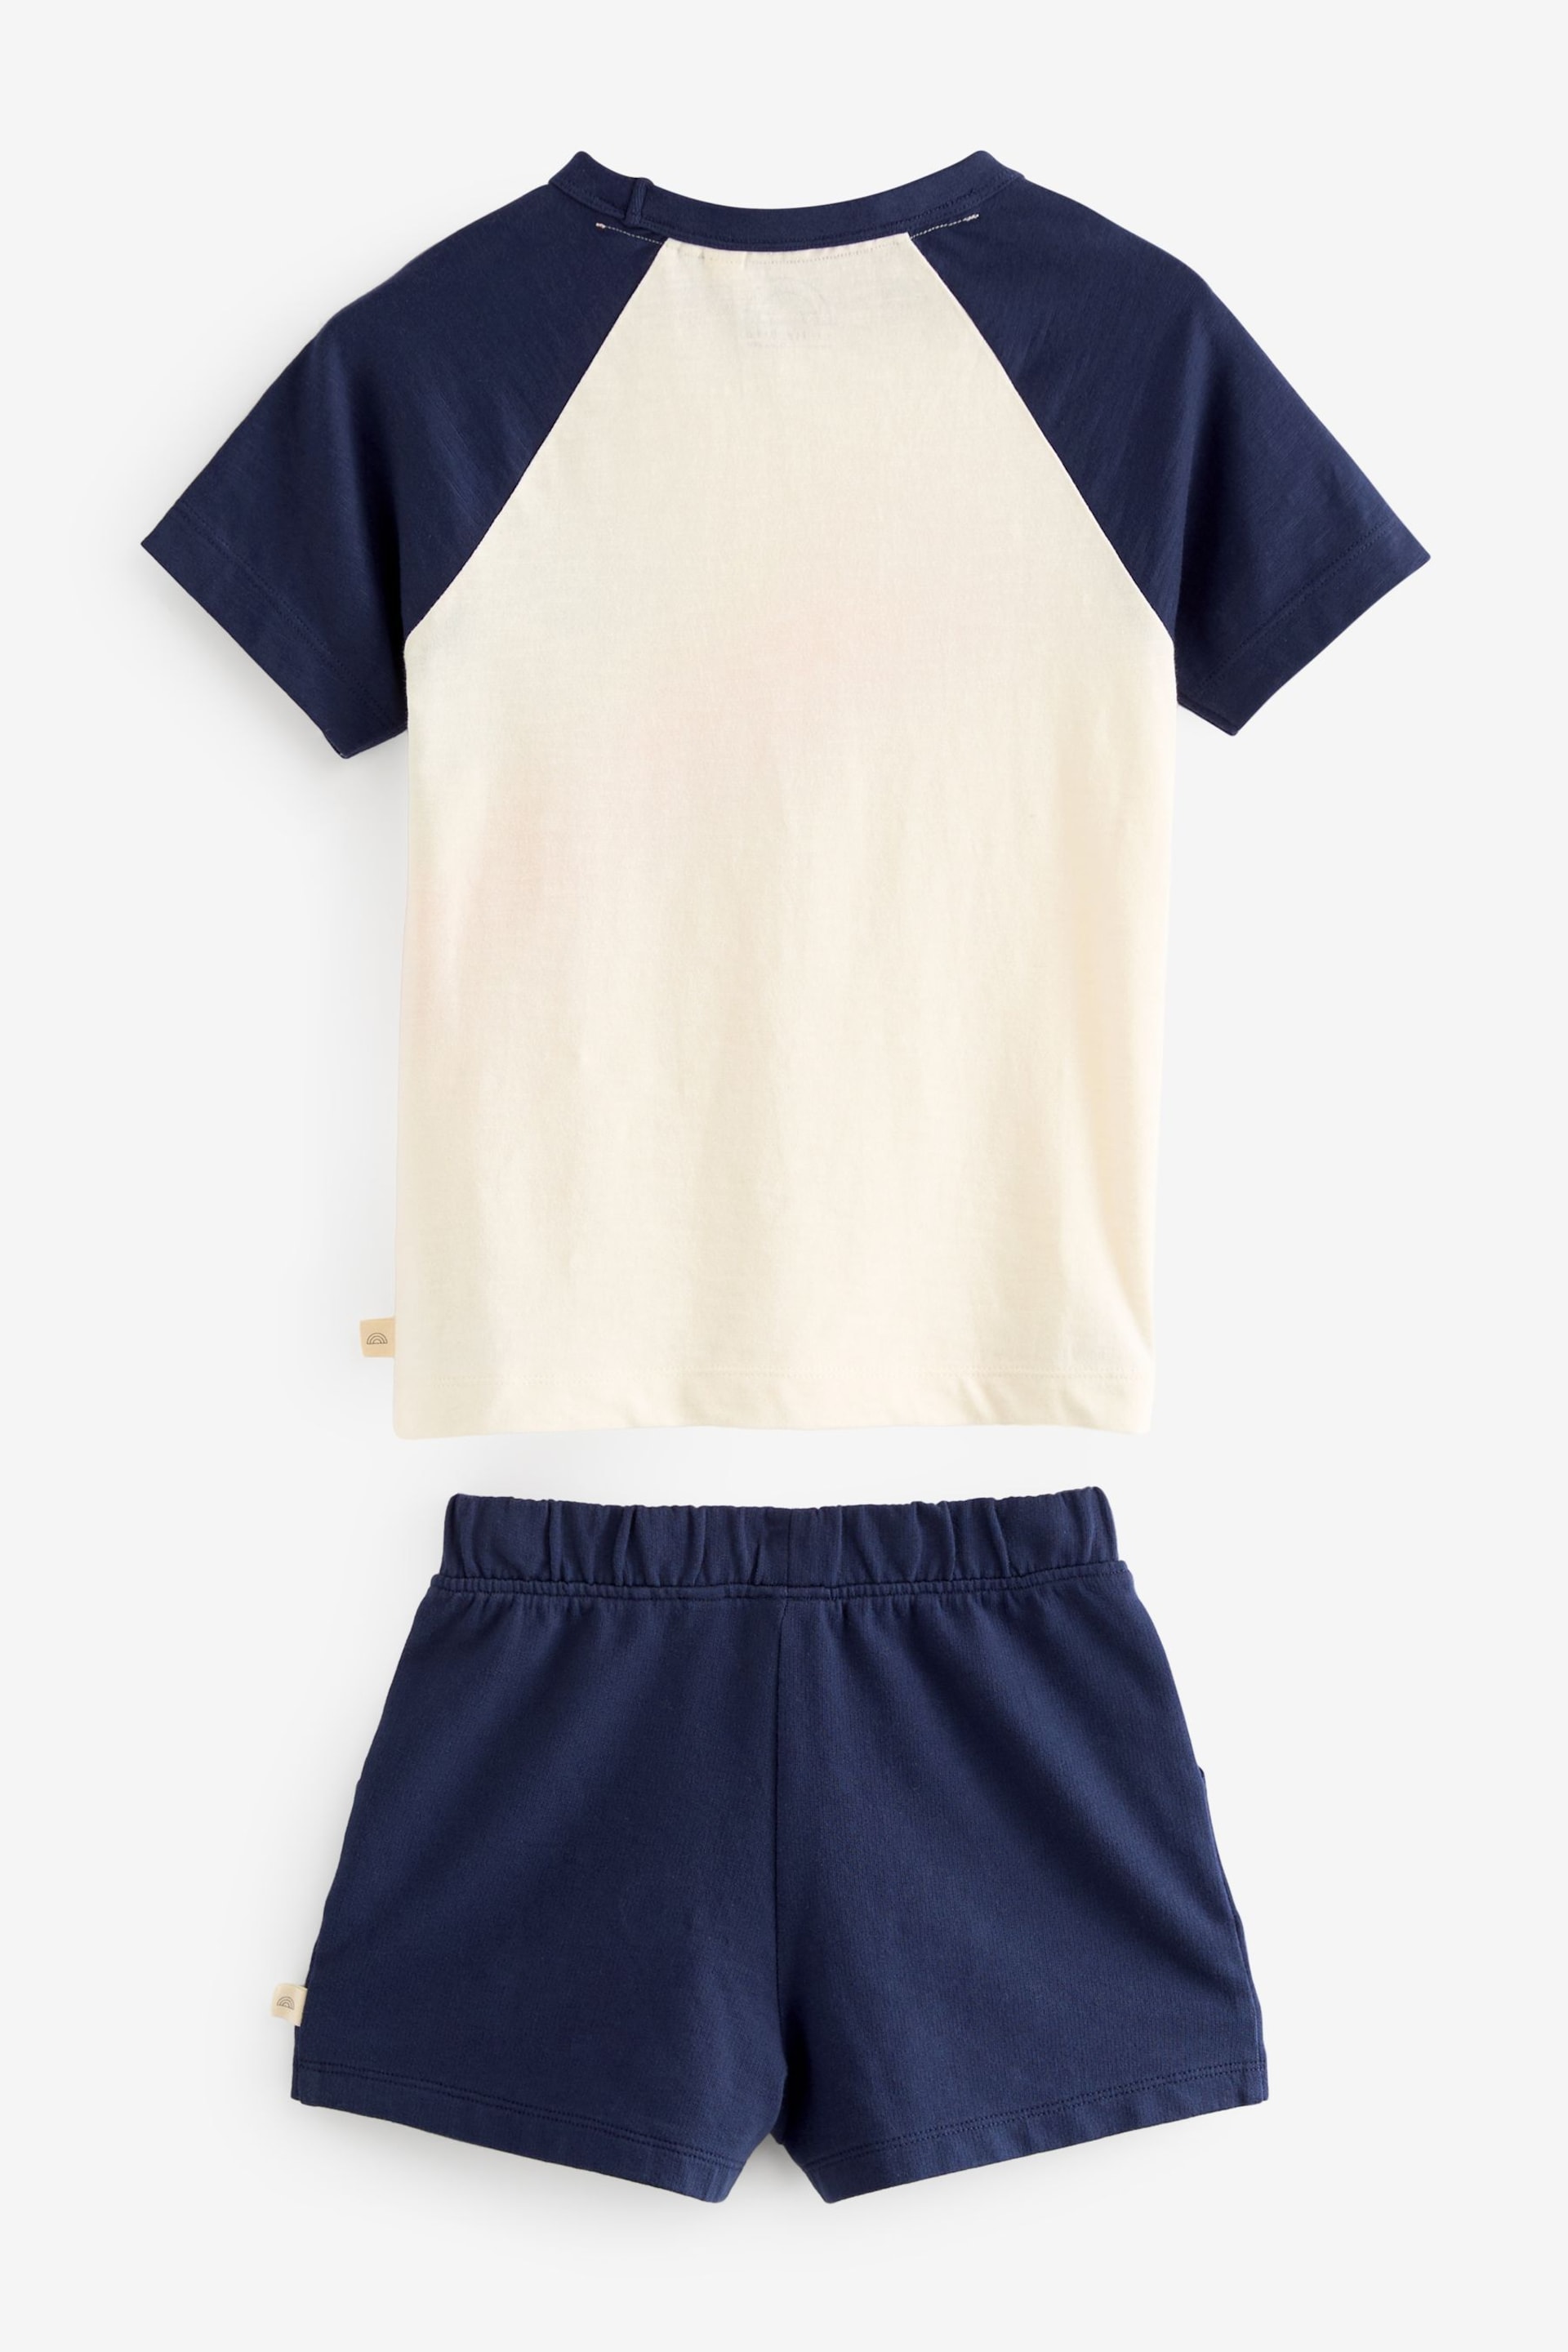 Little Bird by Jools Oliver Navy Happy T-Shirt and Short Set - Image 5 of 6